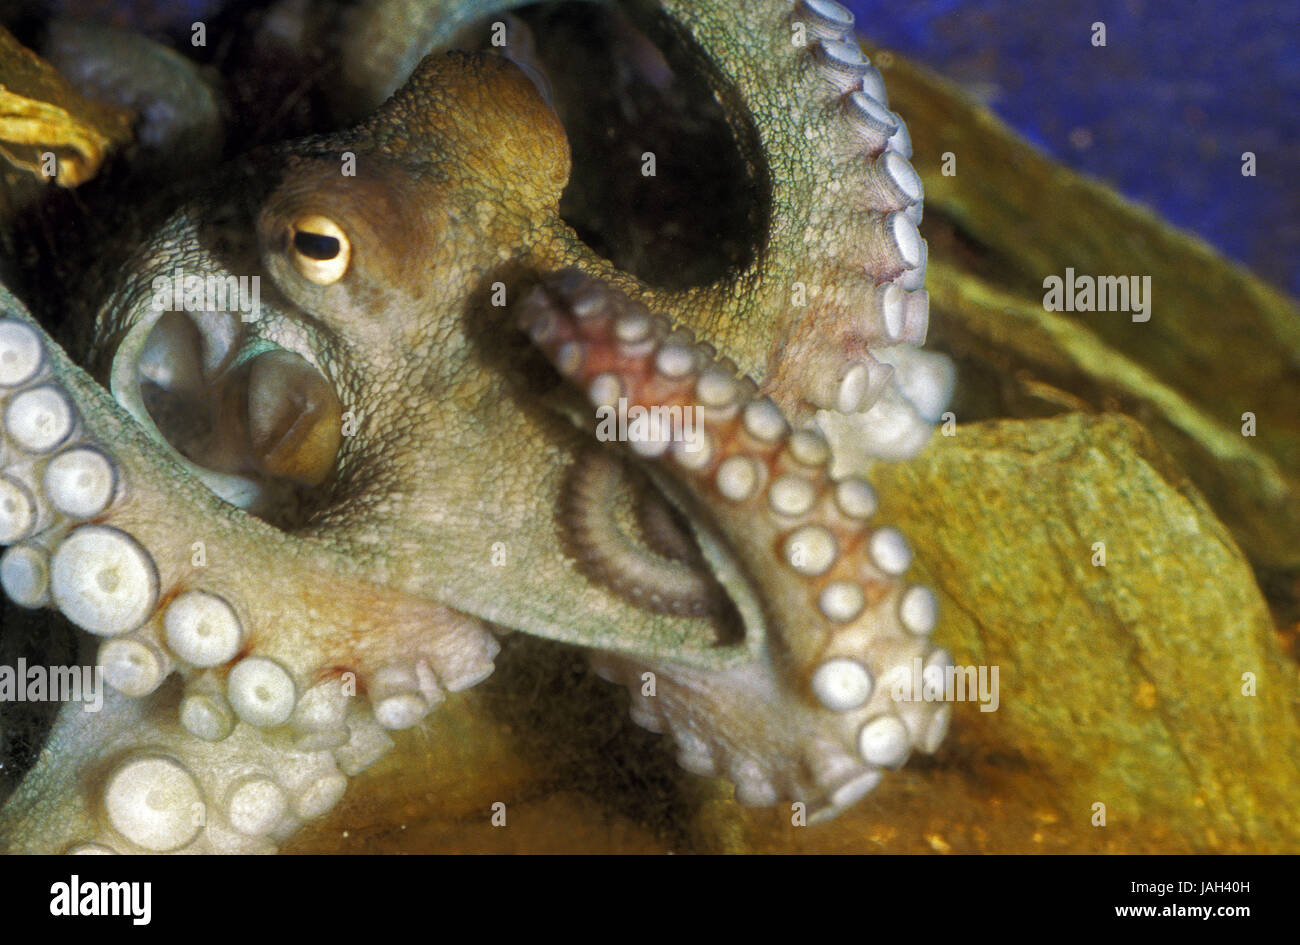 Usual octopus or common octopus,Octopus vulgaris,adult animal,tentacle, Stock Photo